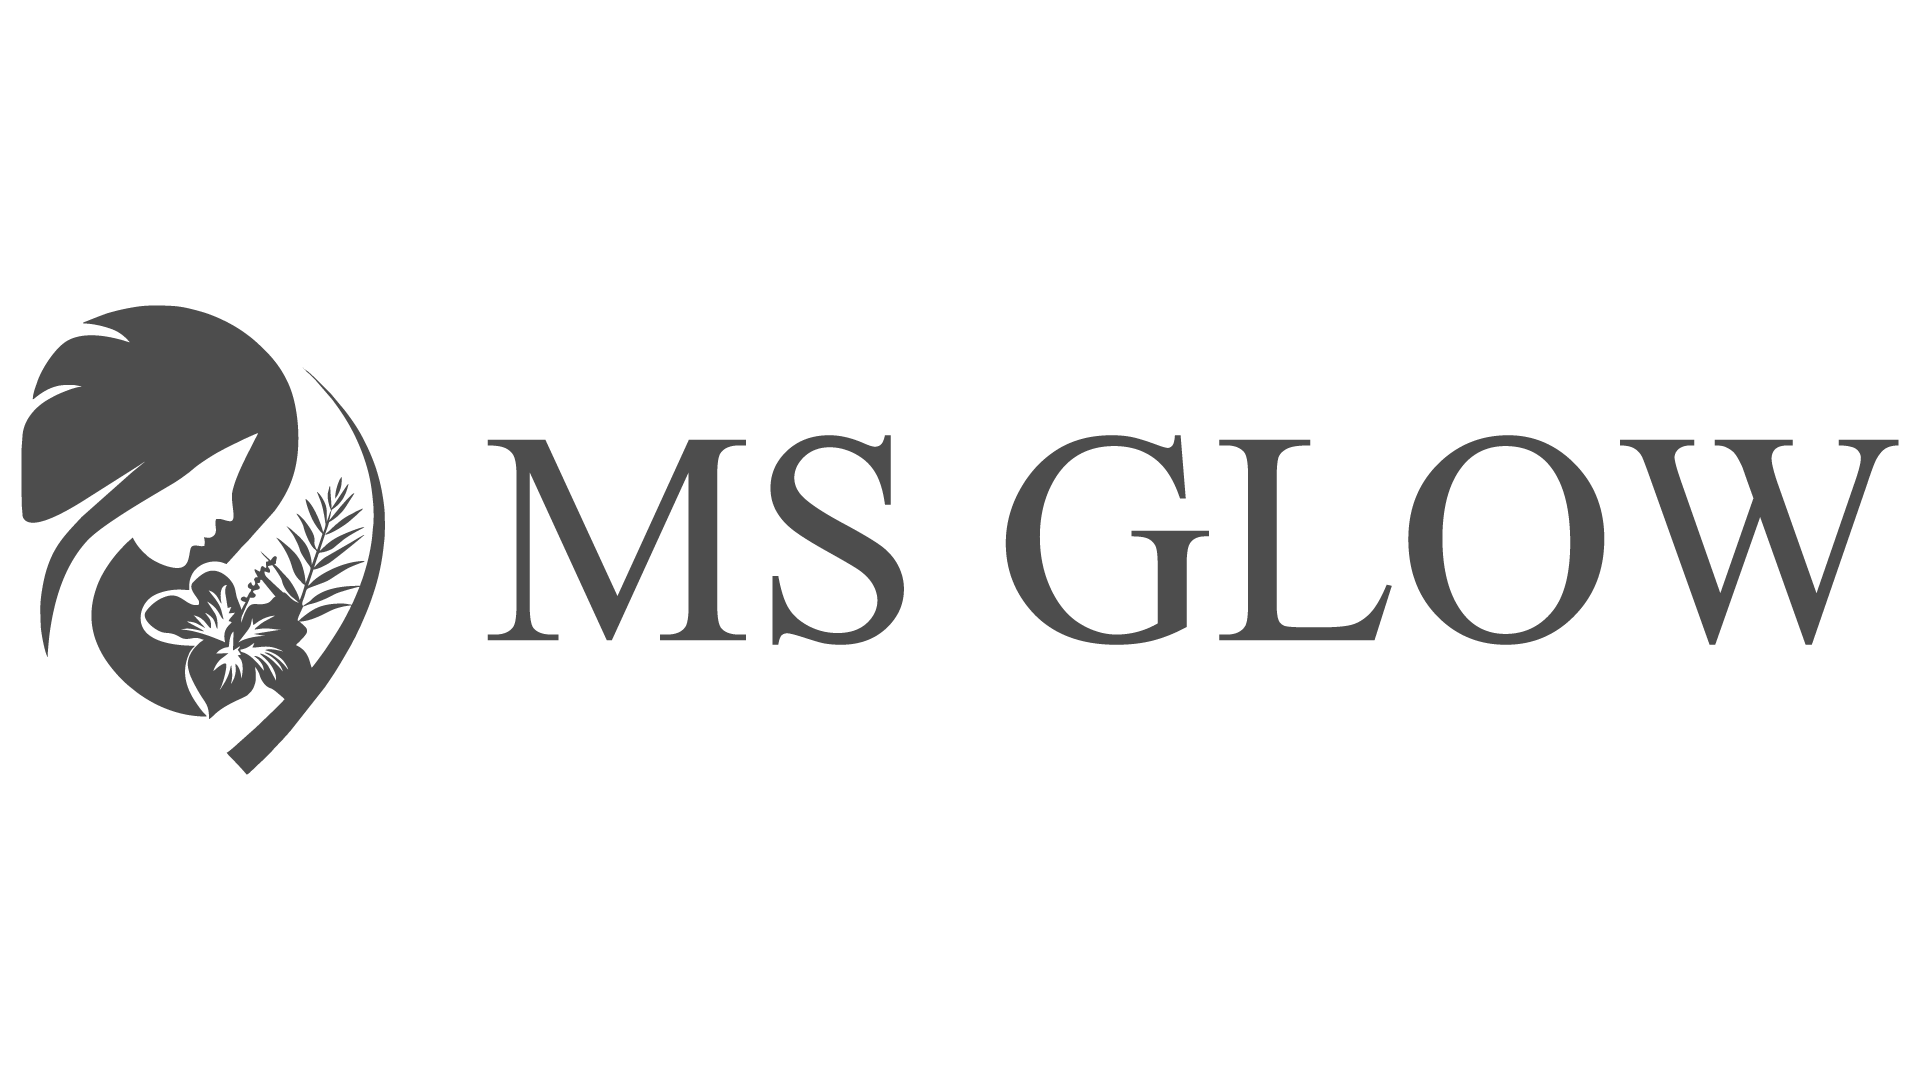 Chatbot in the cosmetics industry owned by the MS Glow company